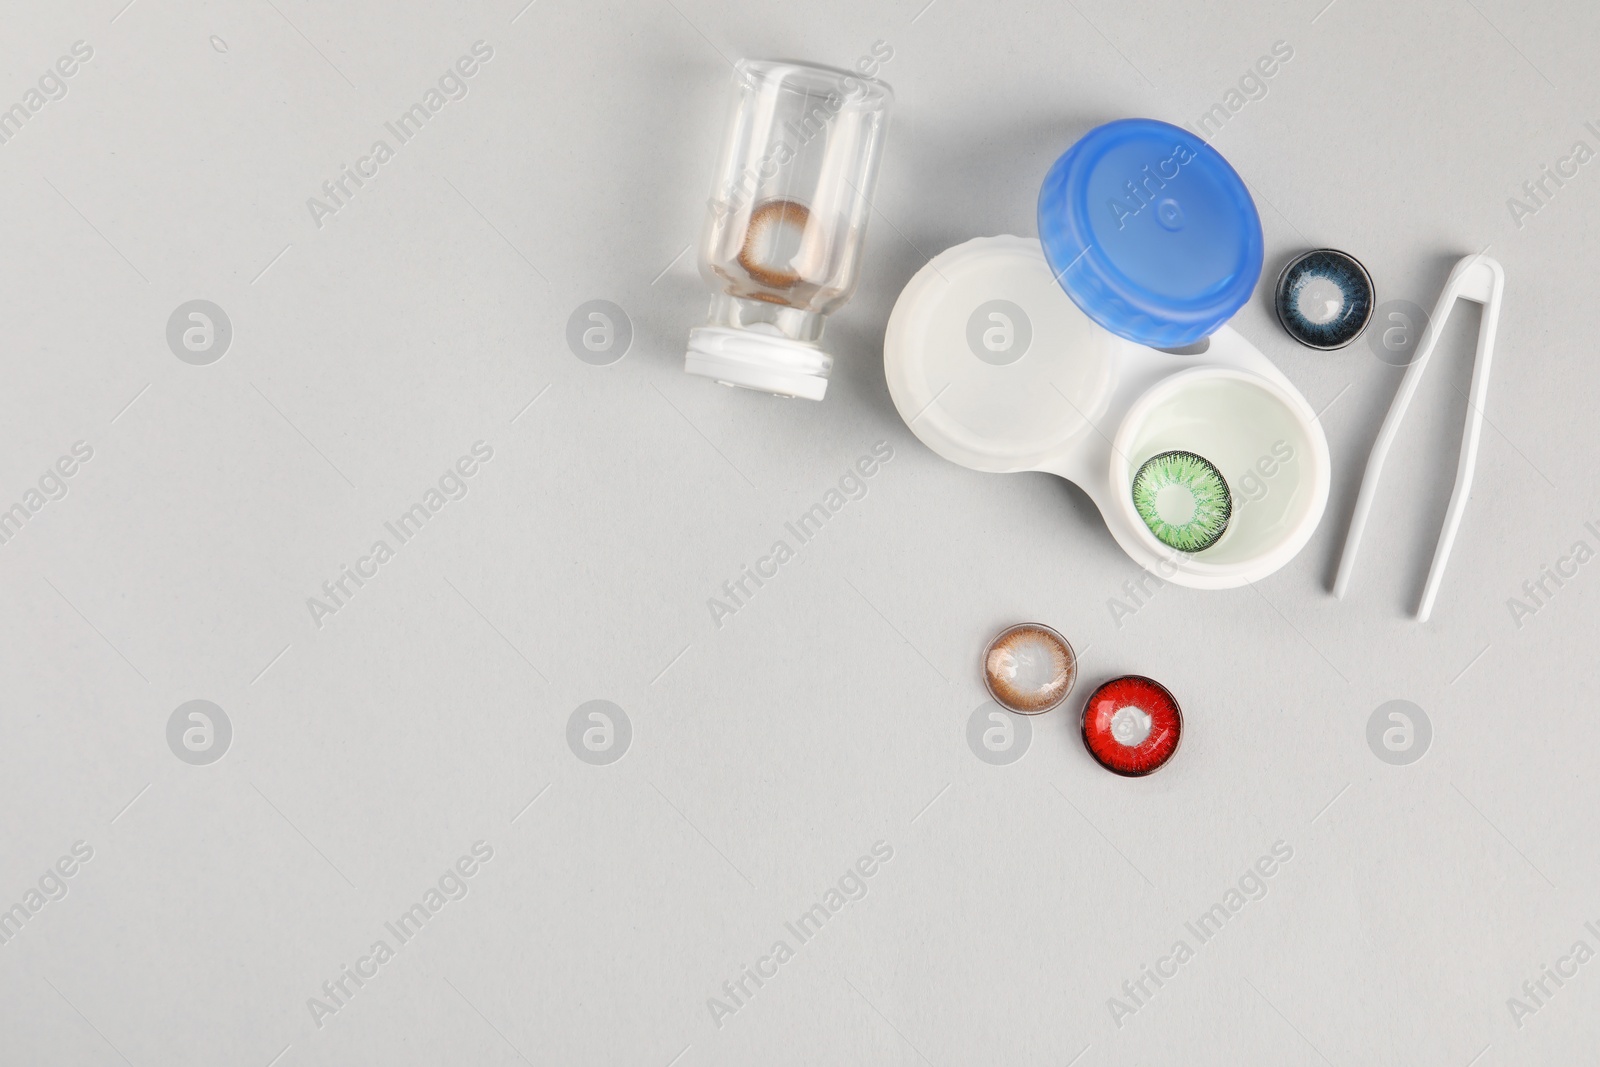 Photo of Different color contact lenses, tweezers and containers on light background, flat lay. Space for text